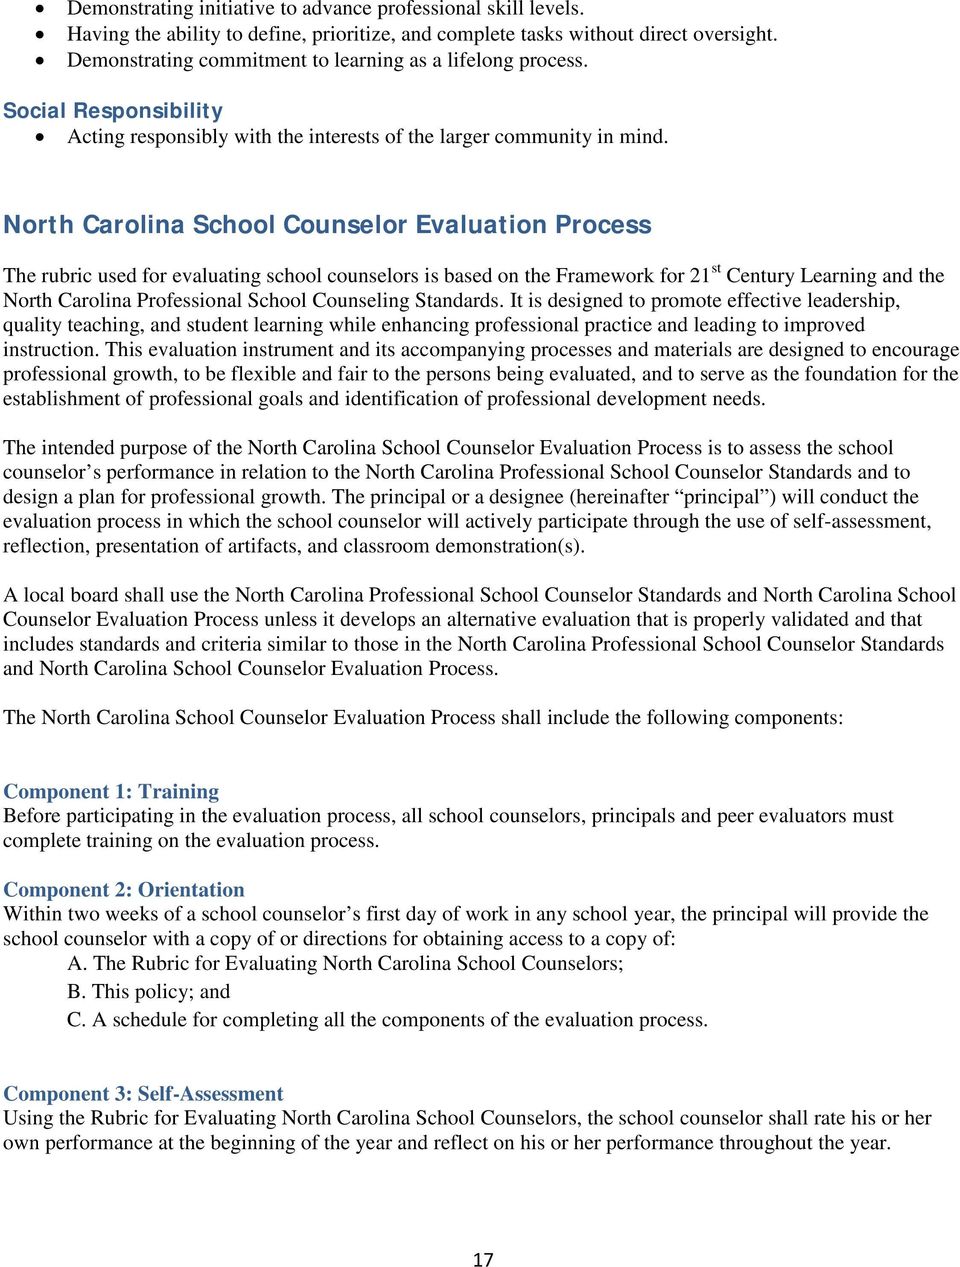 North Carolina School Counselor Evaluation Process The rubric used for evaluating school counselors is based on the Framework for 21 st Century Learning and the North Carolina Professional School